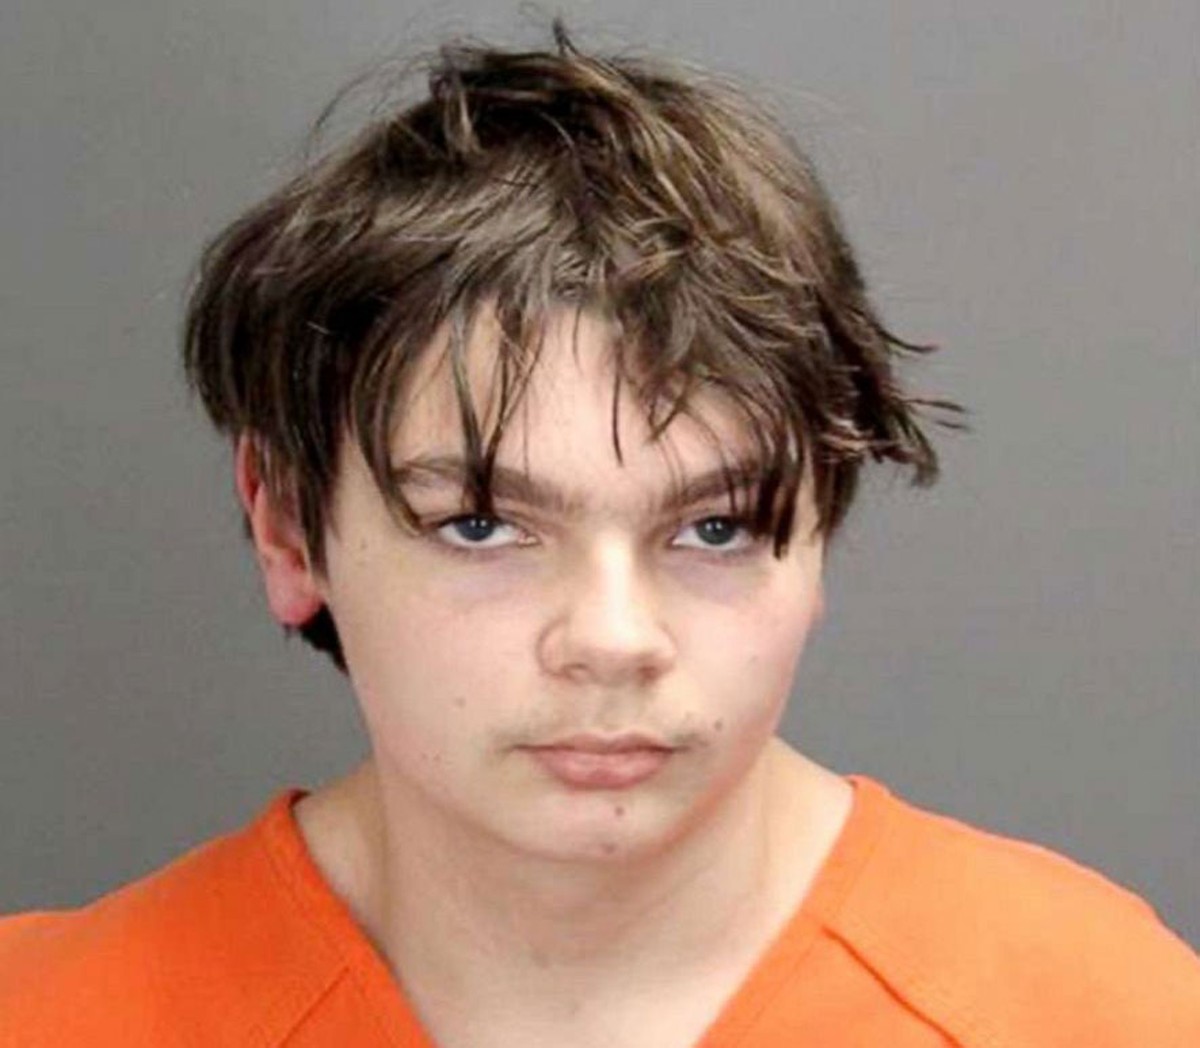 Mass shooter Ethan Crumbley was sentenced on Friday for killing four classmates and injuring six other students and a teacher.